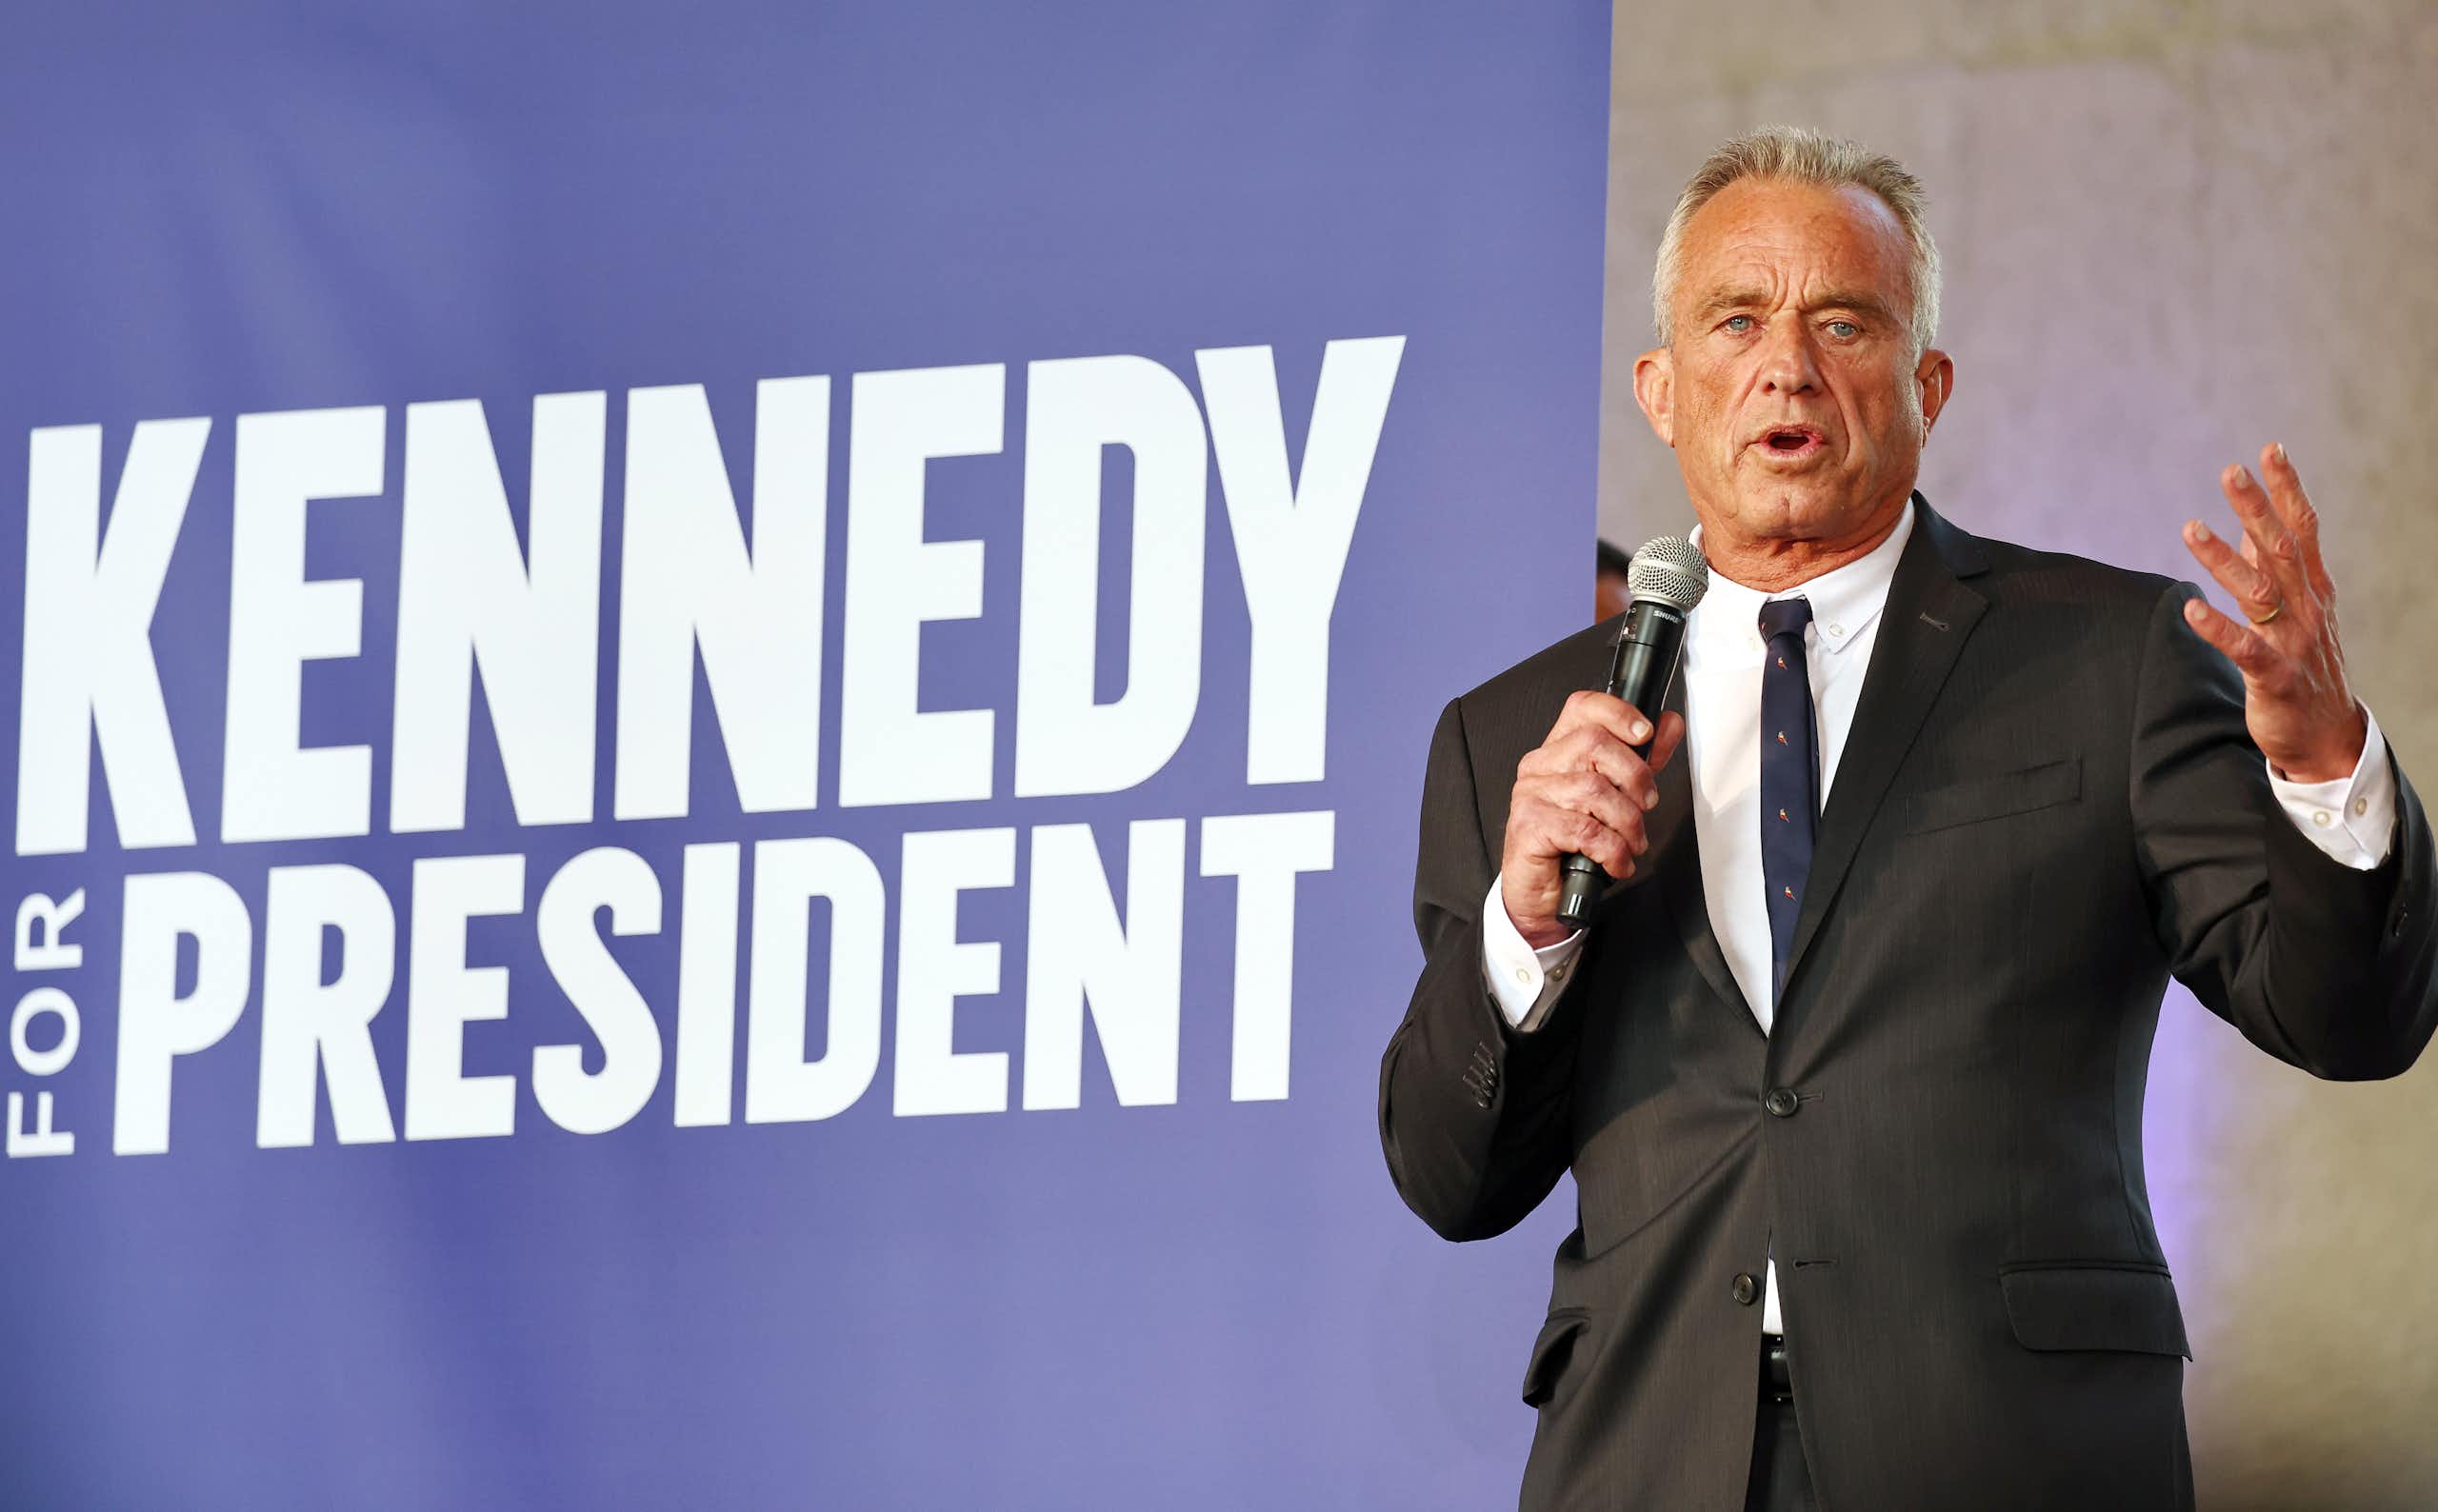 A gray-haired man in a dark suit standing in front of a banner that says 'Kennedy for president'